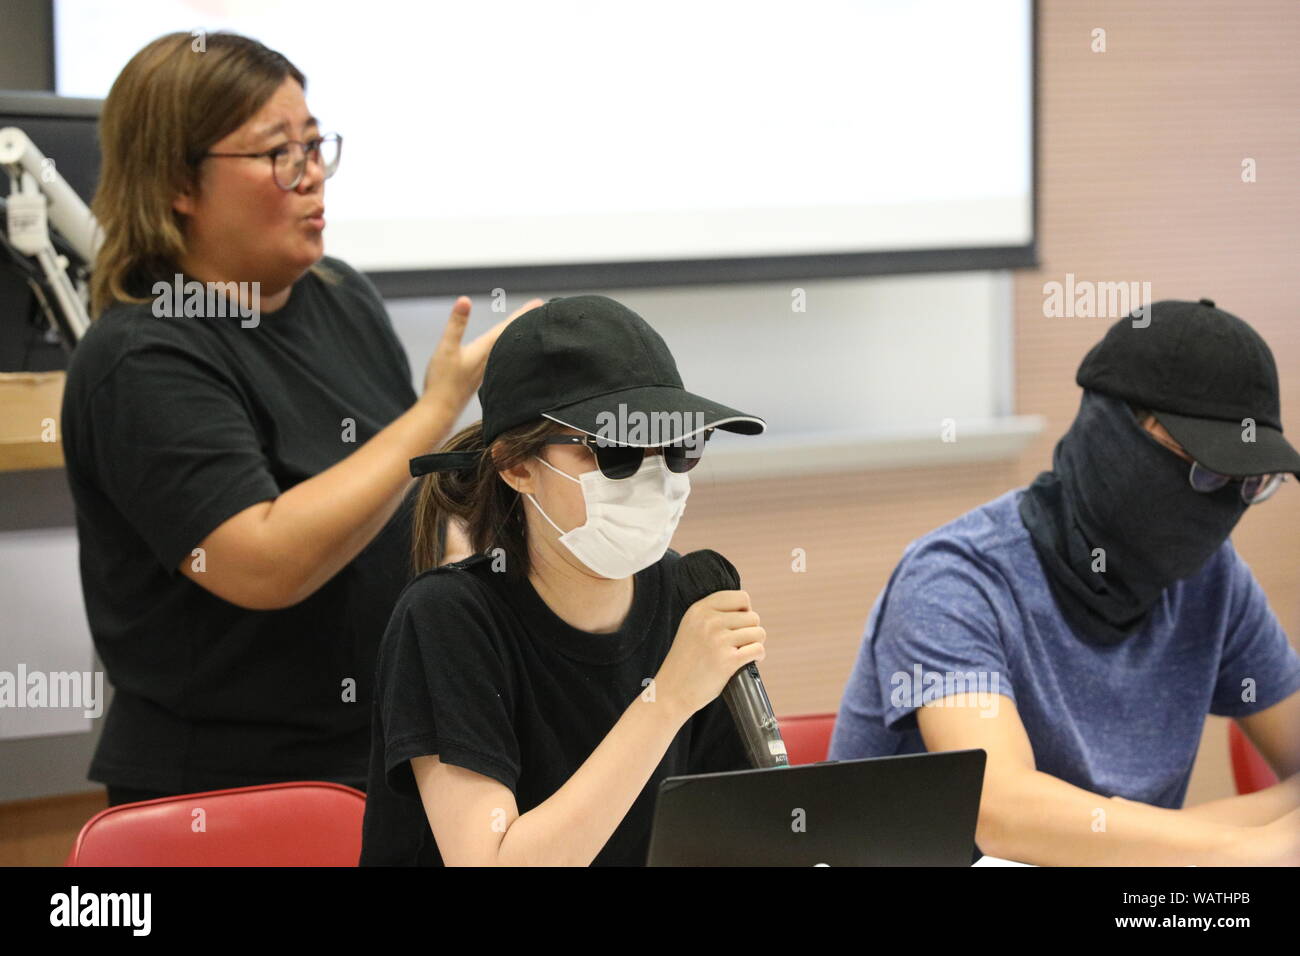 Hong Kong. 22nd Aug, 2019. The 7th Citizens' Press Conference. Where anti extradition bill protesters discussed 'Surveillance City: Hong Kong' and 'public opinion survey tolls the death knell of the government administration' Credit: David Coulson/Alamy Live News Stock Photo